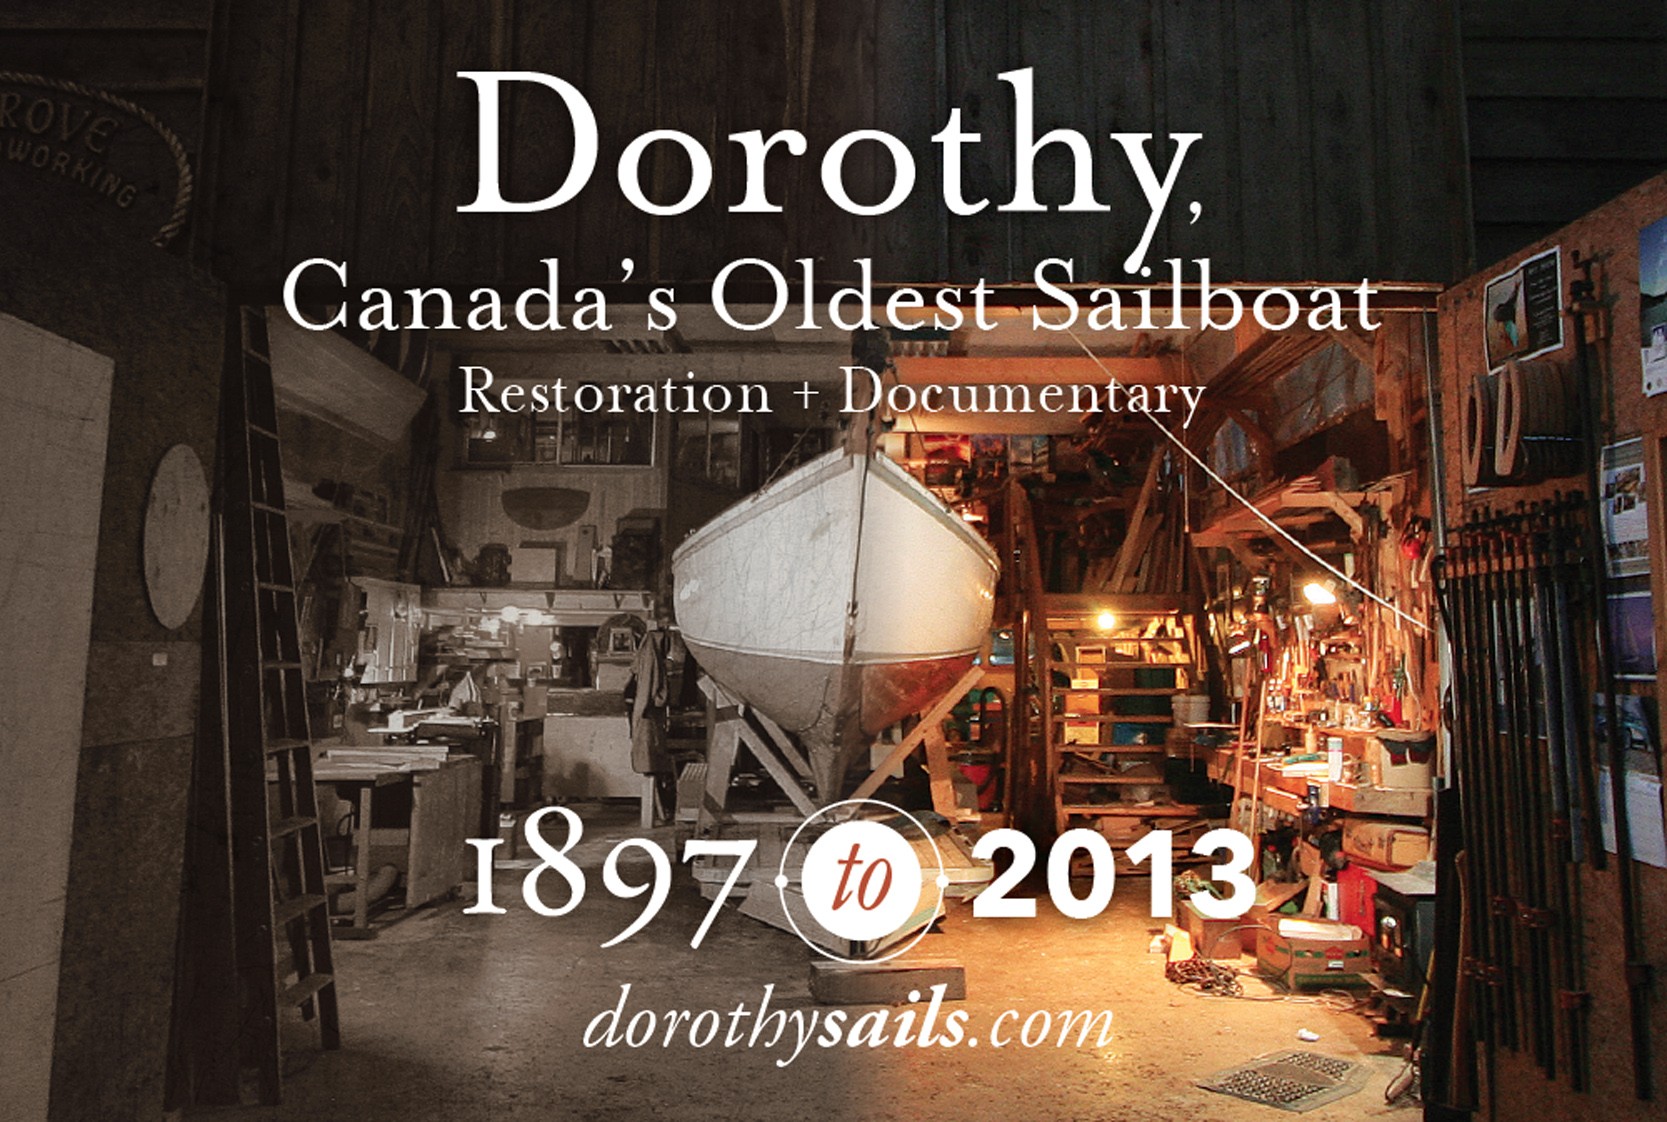 So what’s a Dorothy Doc Indiegogo, anyway?